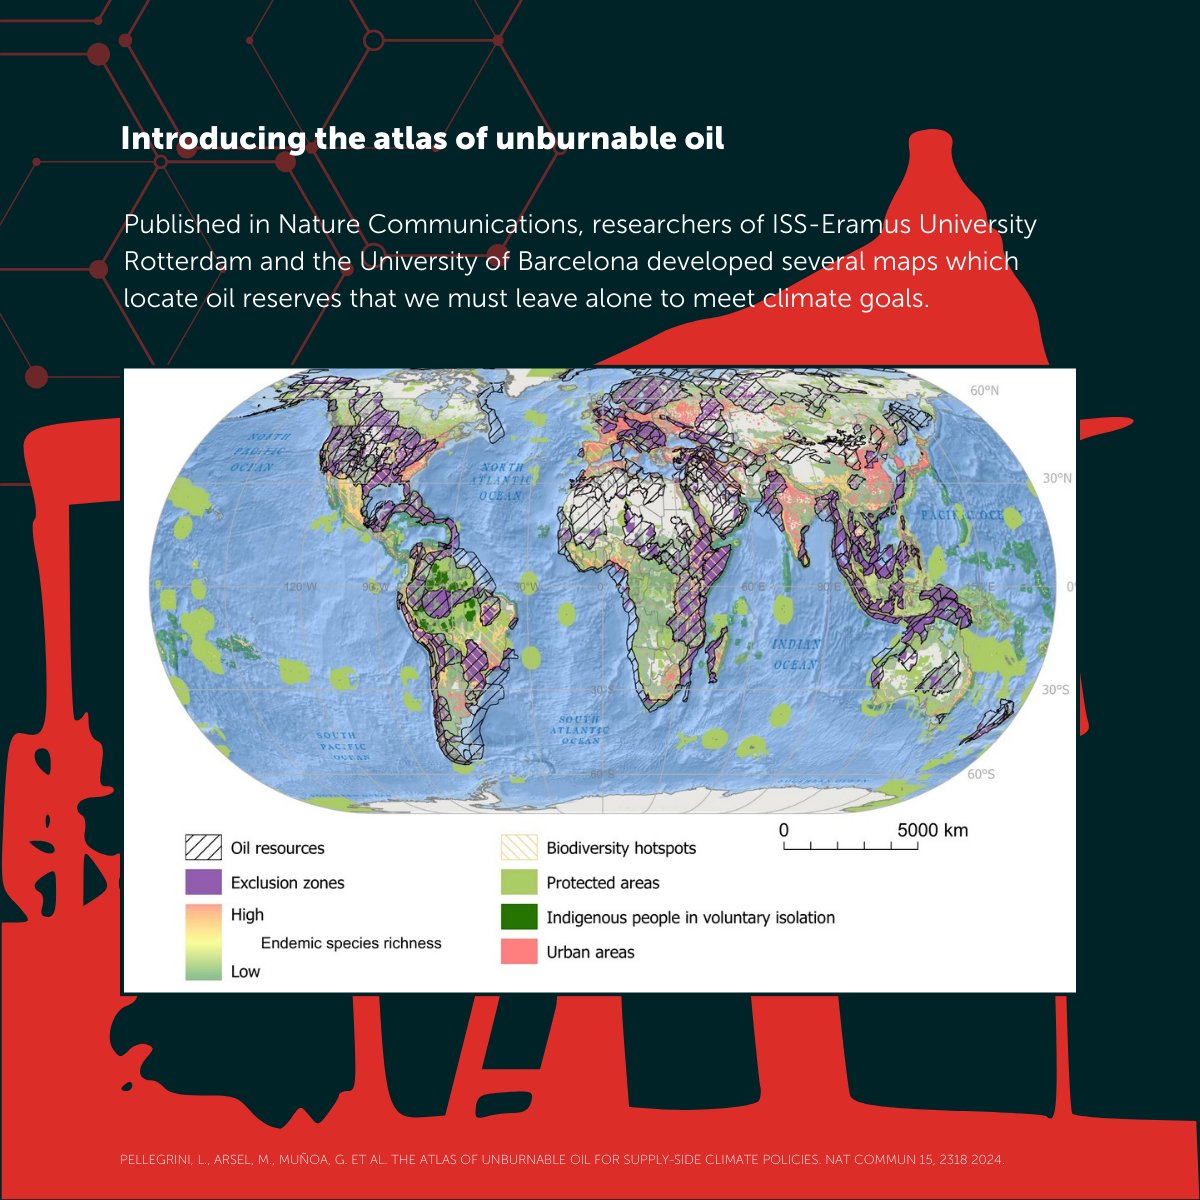 A new study led by researchers of ISS-@ErasmusUni and @UniBarcelona suggests avoiding most coal, gas and oil use. 🛢️ Their research, published in @NatureComms, introduces an atlas that maps vital oil resources to meet the 1.5°C #climate goal: bit.ly/4crr1FW